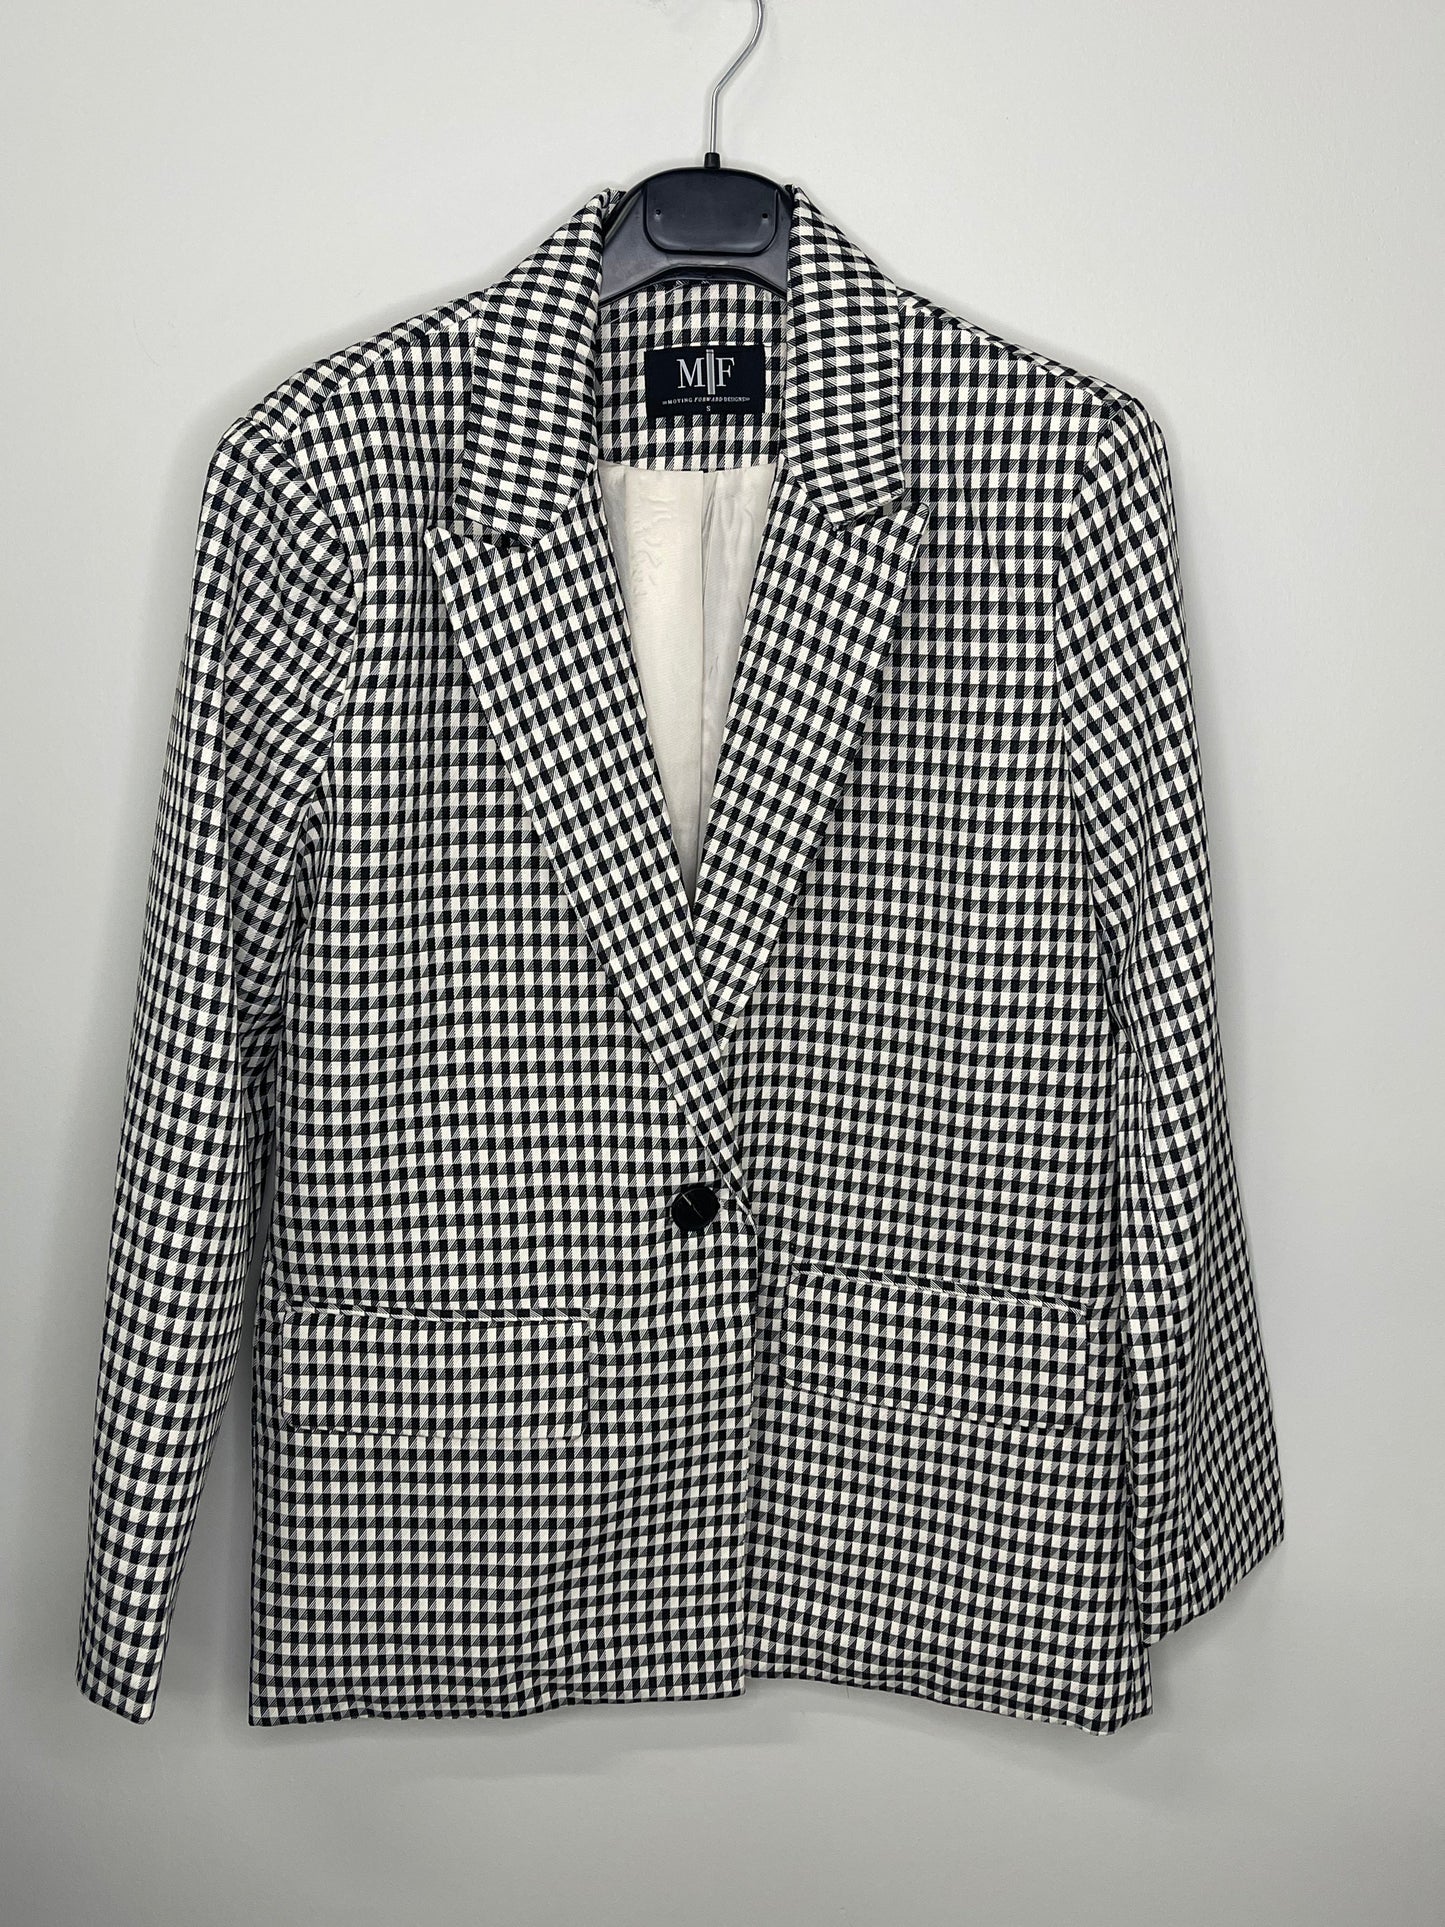 Blazer, Houndstooth, Flying Bees